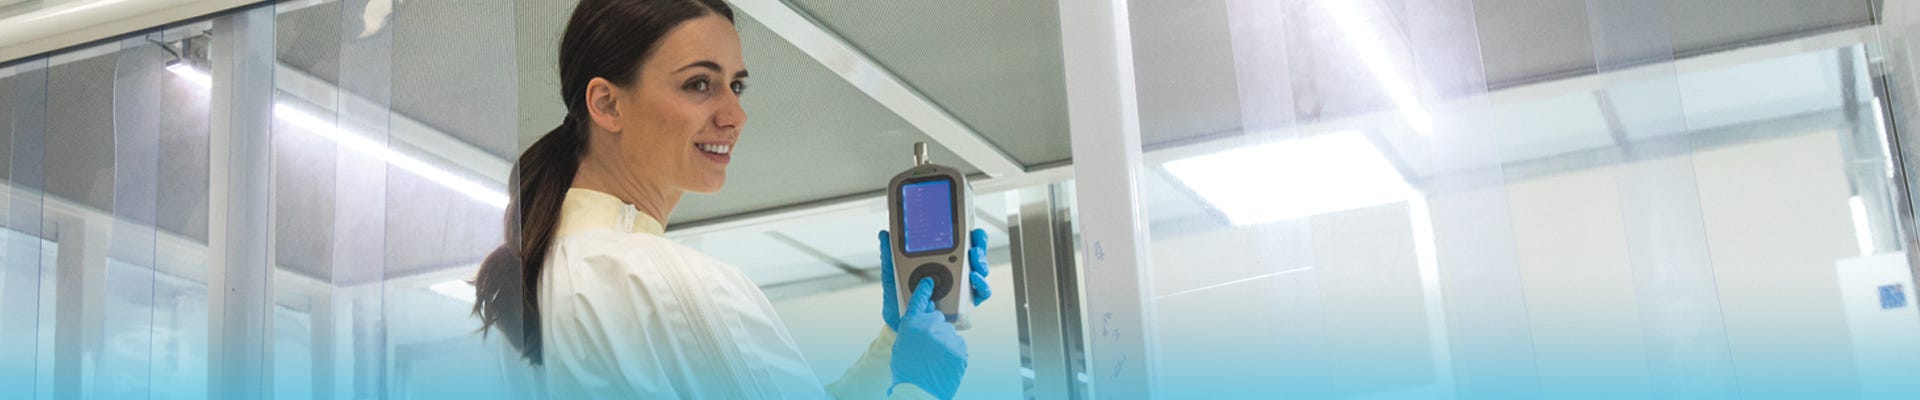 Handheld particle counters offers an affordable and easy to use way to accurately measure cleanroom performance